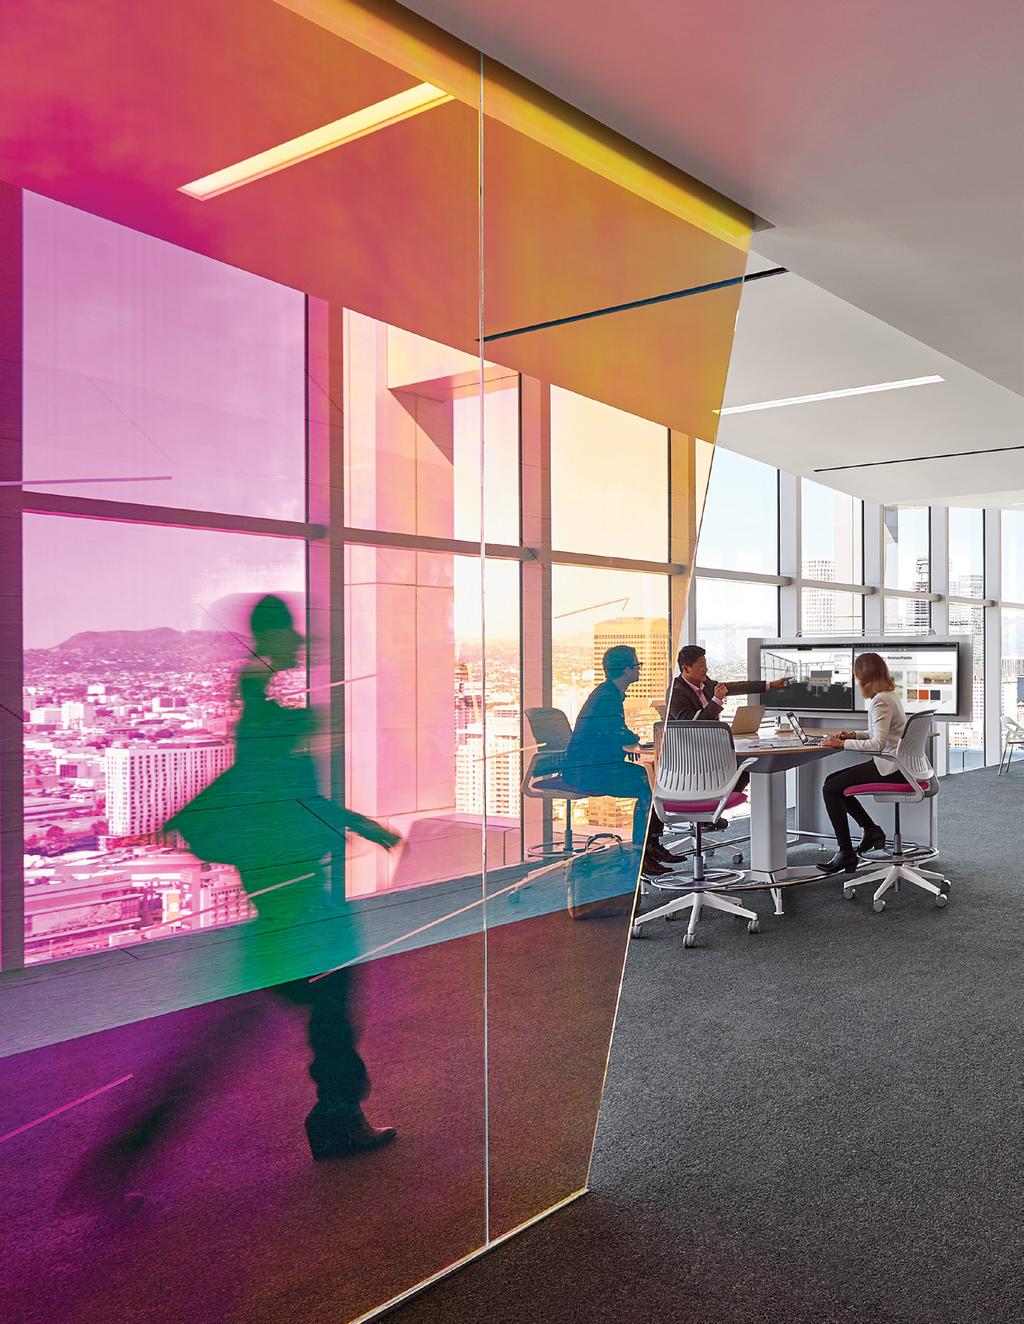 Introduction An Engaged Environment The Steelcase Global Workplace Report shows the most engaged and satisfied employees work for organizations that provide choice and control over where and how they